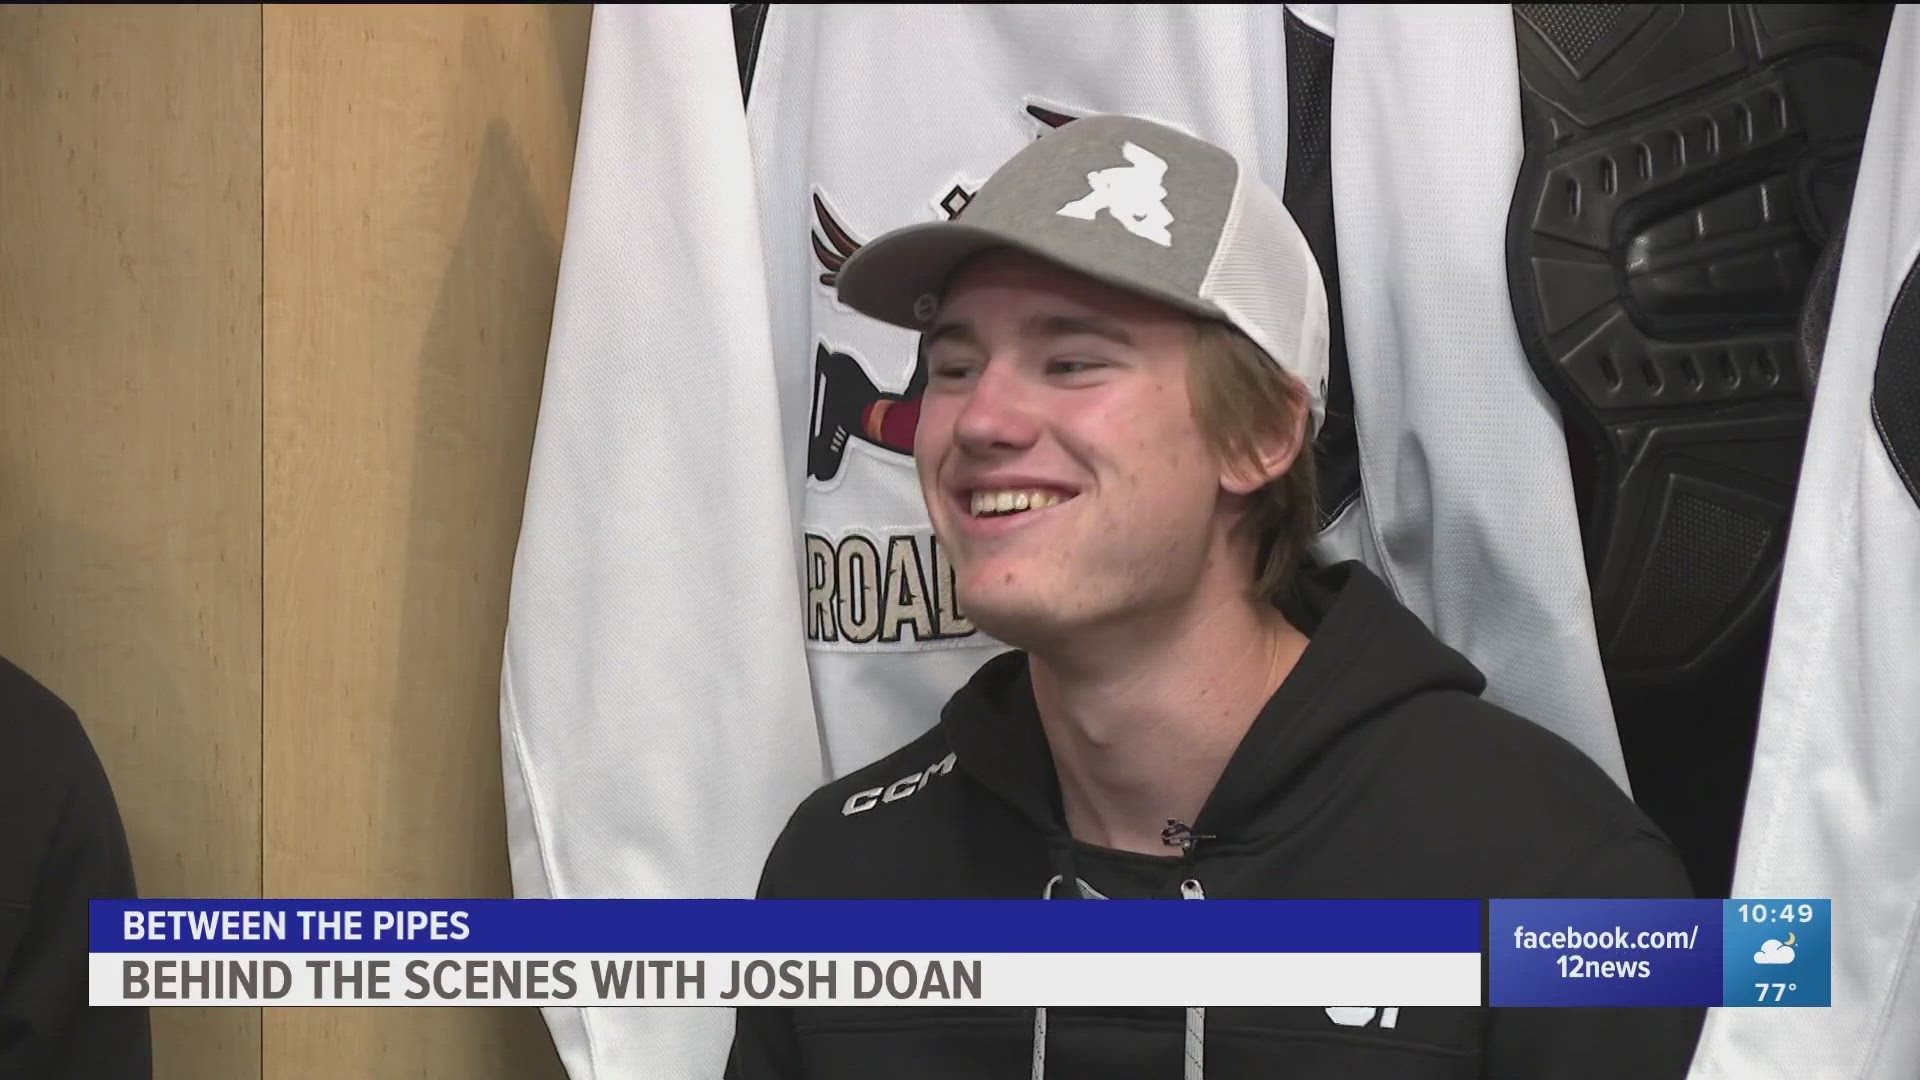 12Sports gets the all-access path with Josh Doan at practice with his new team, the Tucson Roadrunners, as Doan prepares for his first playoffs as a pro